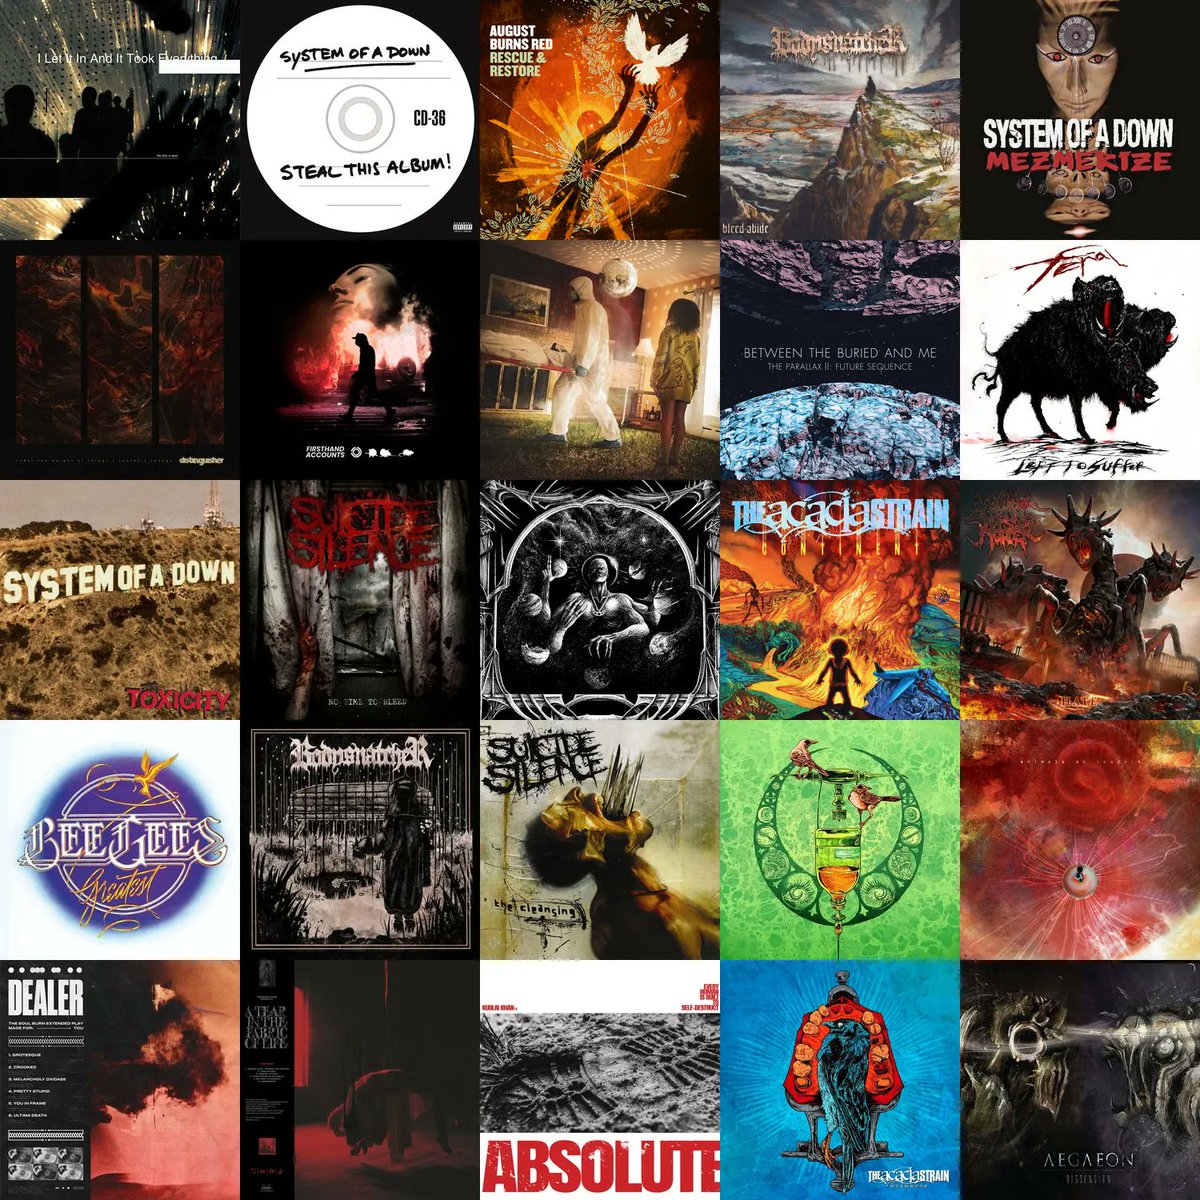 Friday 5x5! What's everybody's looking like? Featuring: Loathe SOAD August Burns Red Bodysnatcher Distinguisher Johnny Booth BTBAM Left to Suffer Suicide Silence The Acacia Strain Thy Art Is Murder The Beegees Animals as Leaders Dealer Knocked Loose Kublai Khan Aegeon